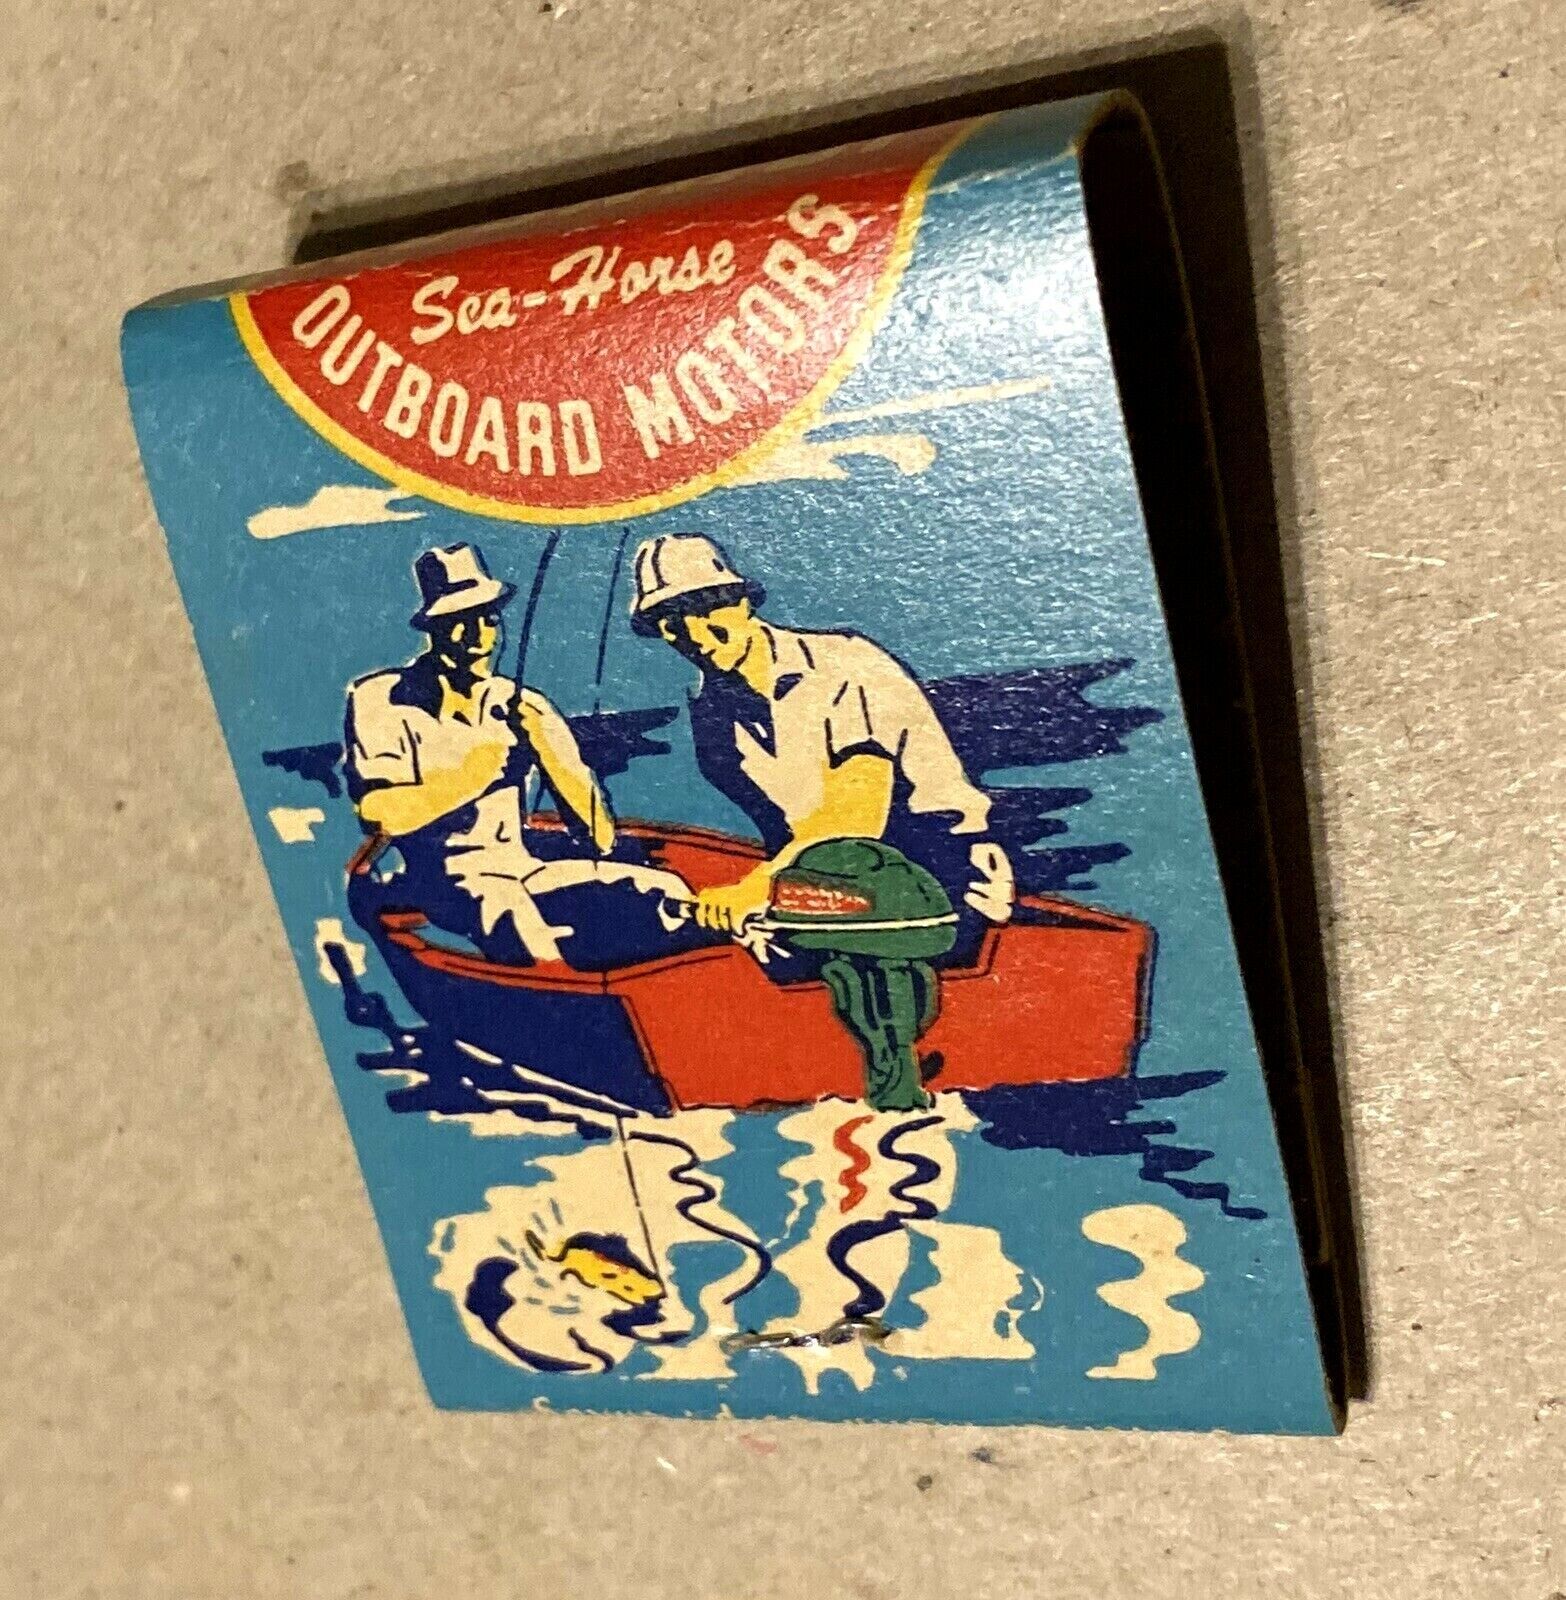 Vintage 1950’s NOS Johnson Sea-horse Outboard Motors Match Book Matches Ad